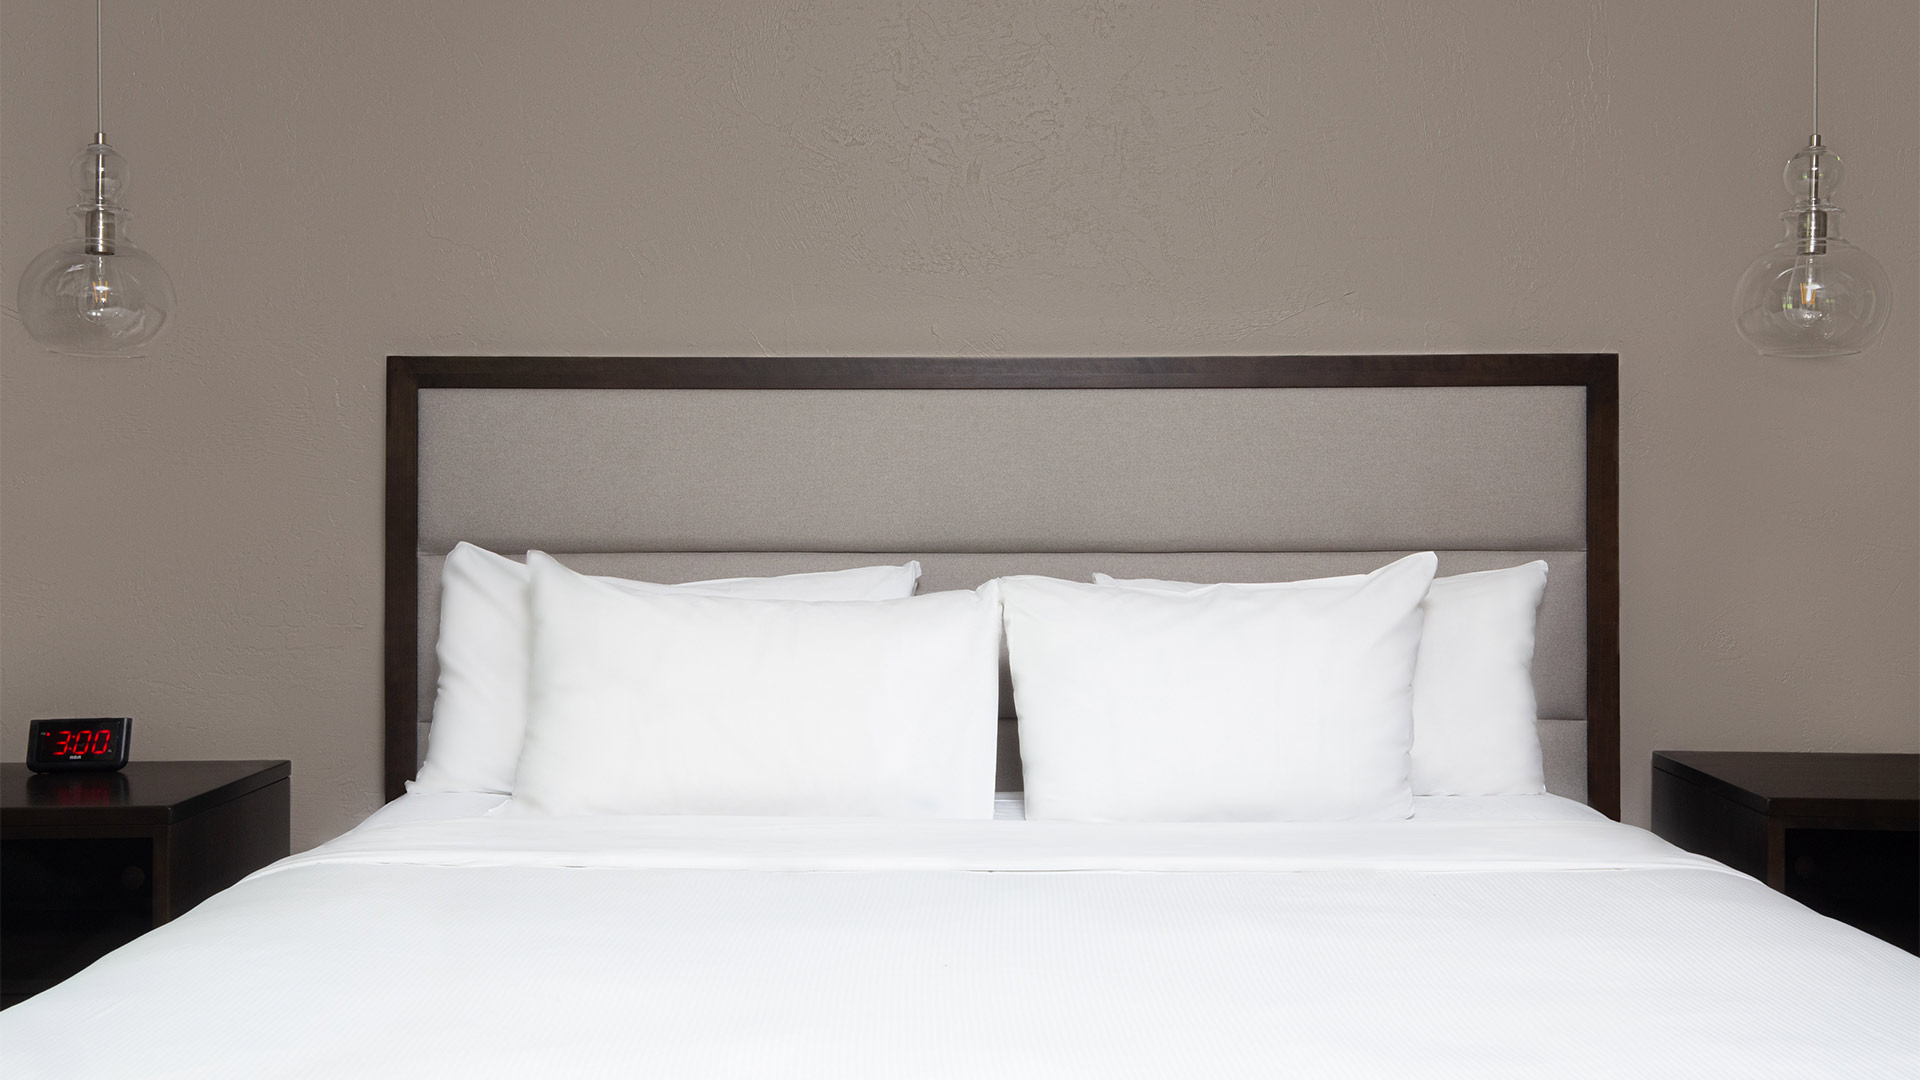 detail shot of a bed with all white linens and bed side tables on either side of the bed